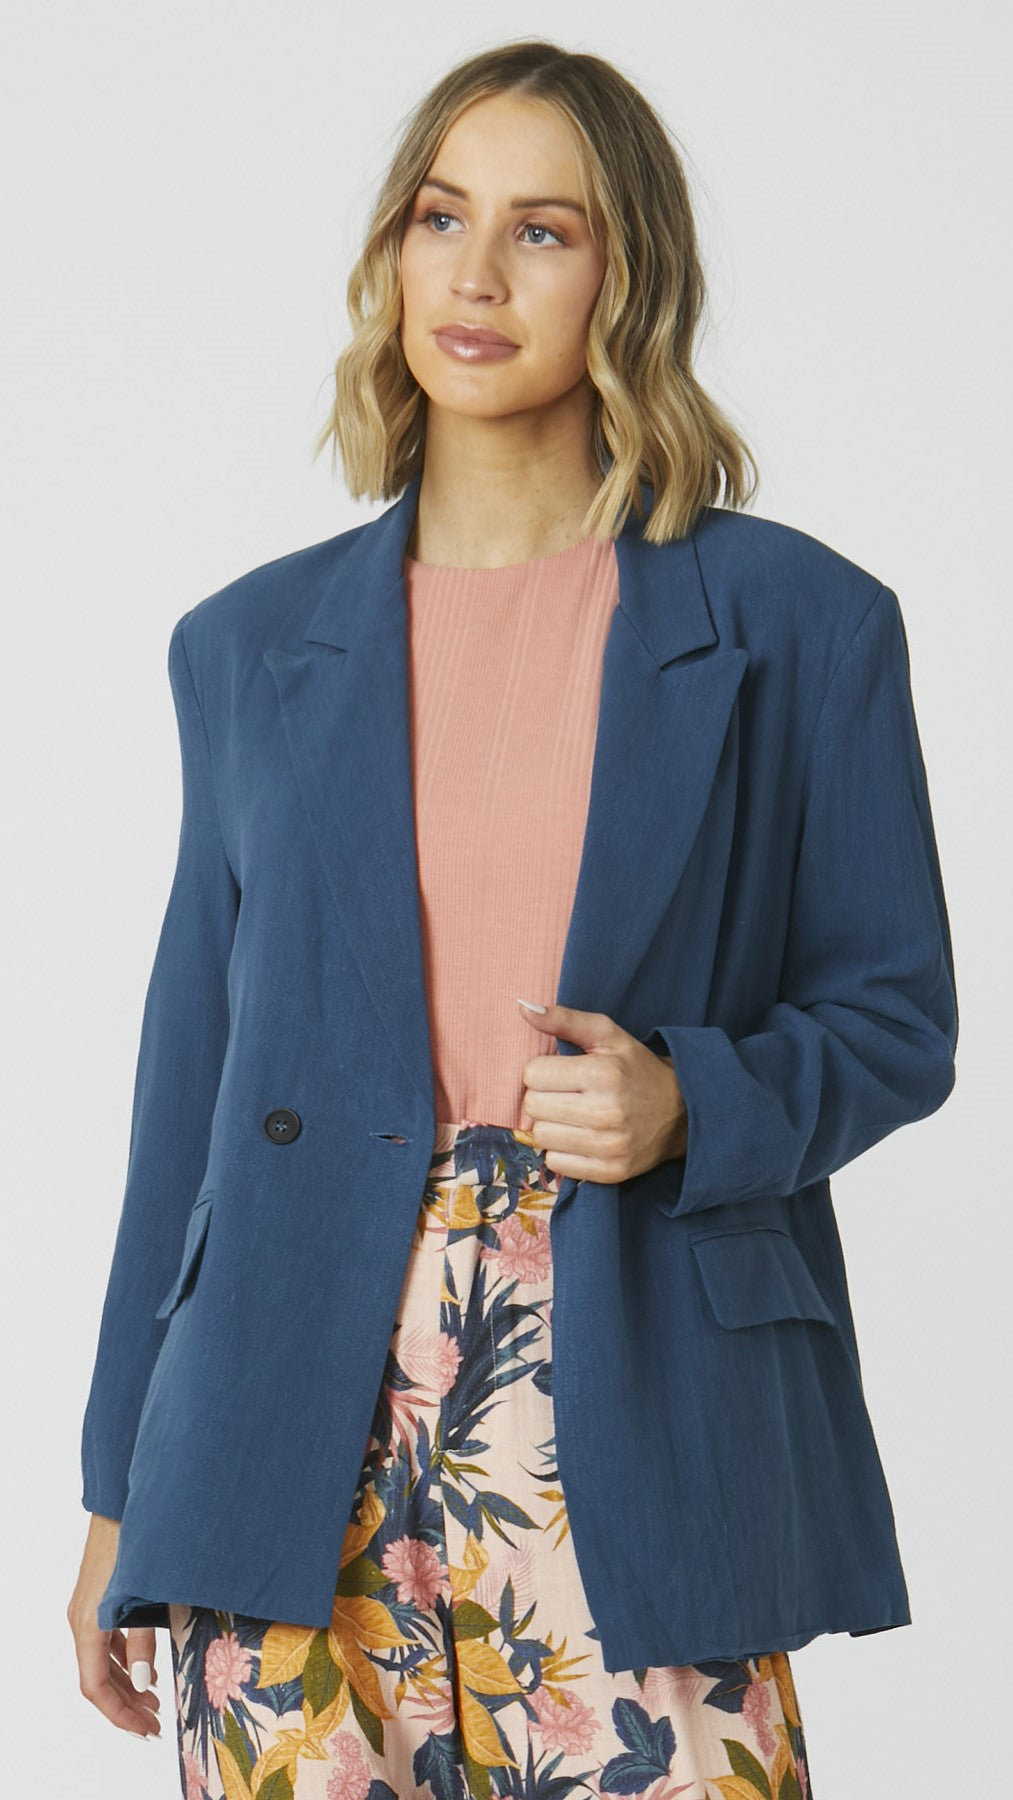 Alexis Blazer - Multi Floral | Sass Clothing | The Alexis Blazer is the fun yet classic blazer you need in your wardrobe! From meetings to margaritas this blazer has all your style needs covered in one!

Relaxed 